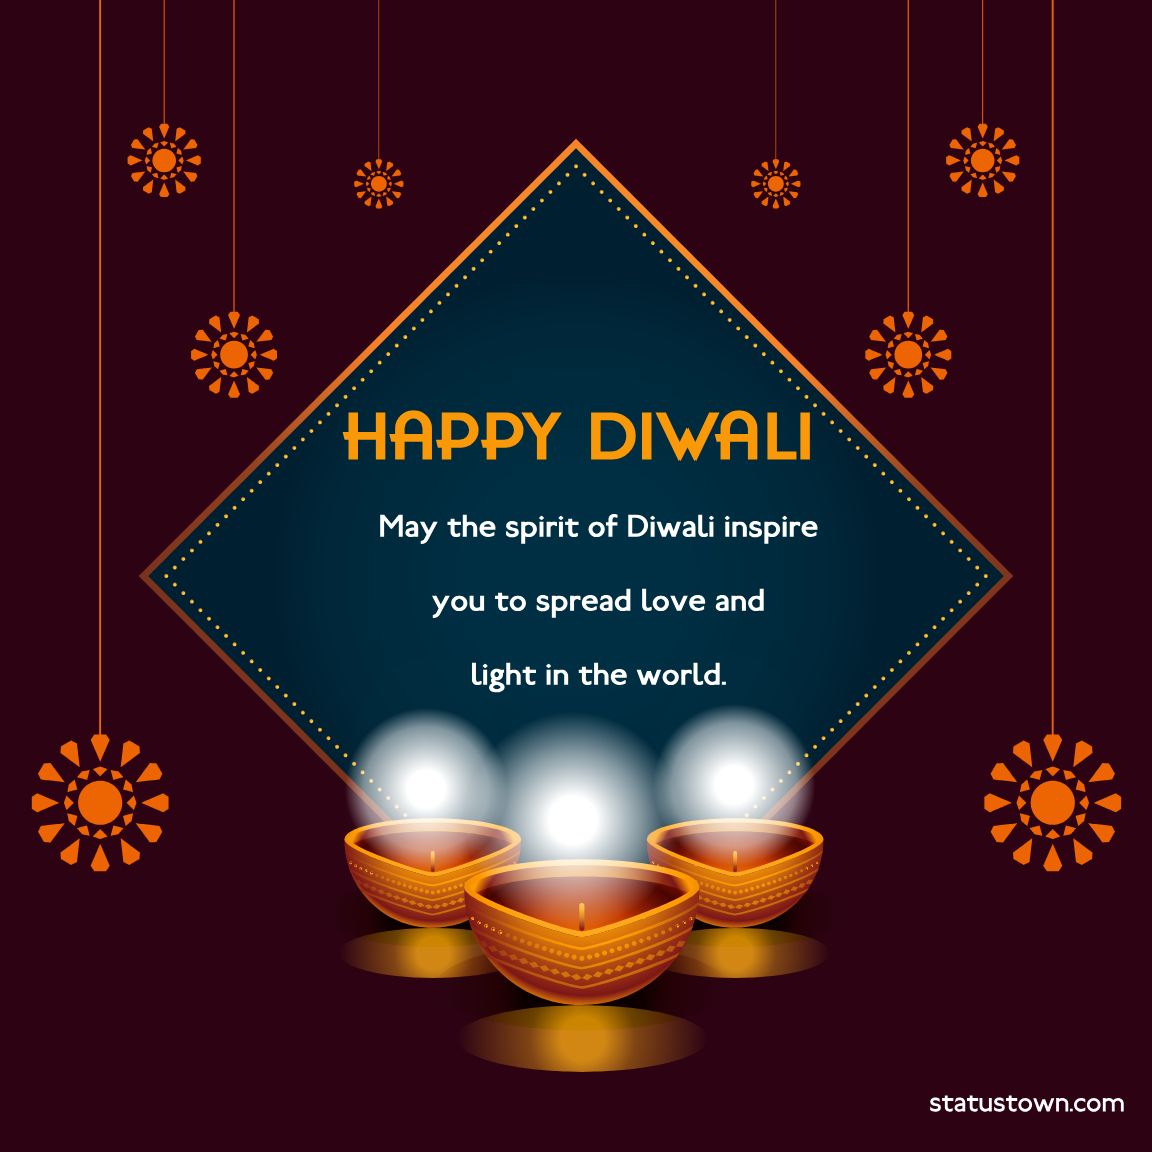 May the spirit of Diwali inspire you to spread love and light in the world. - Diwali Status wishes, messages, and status